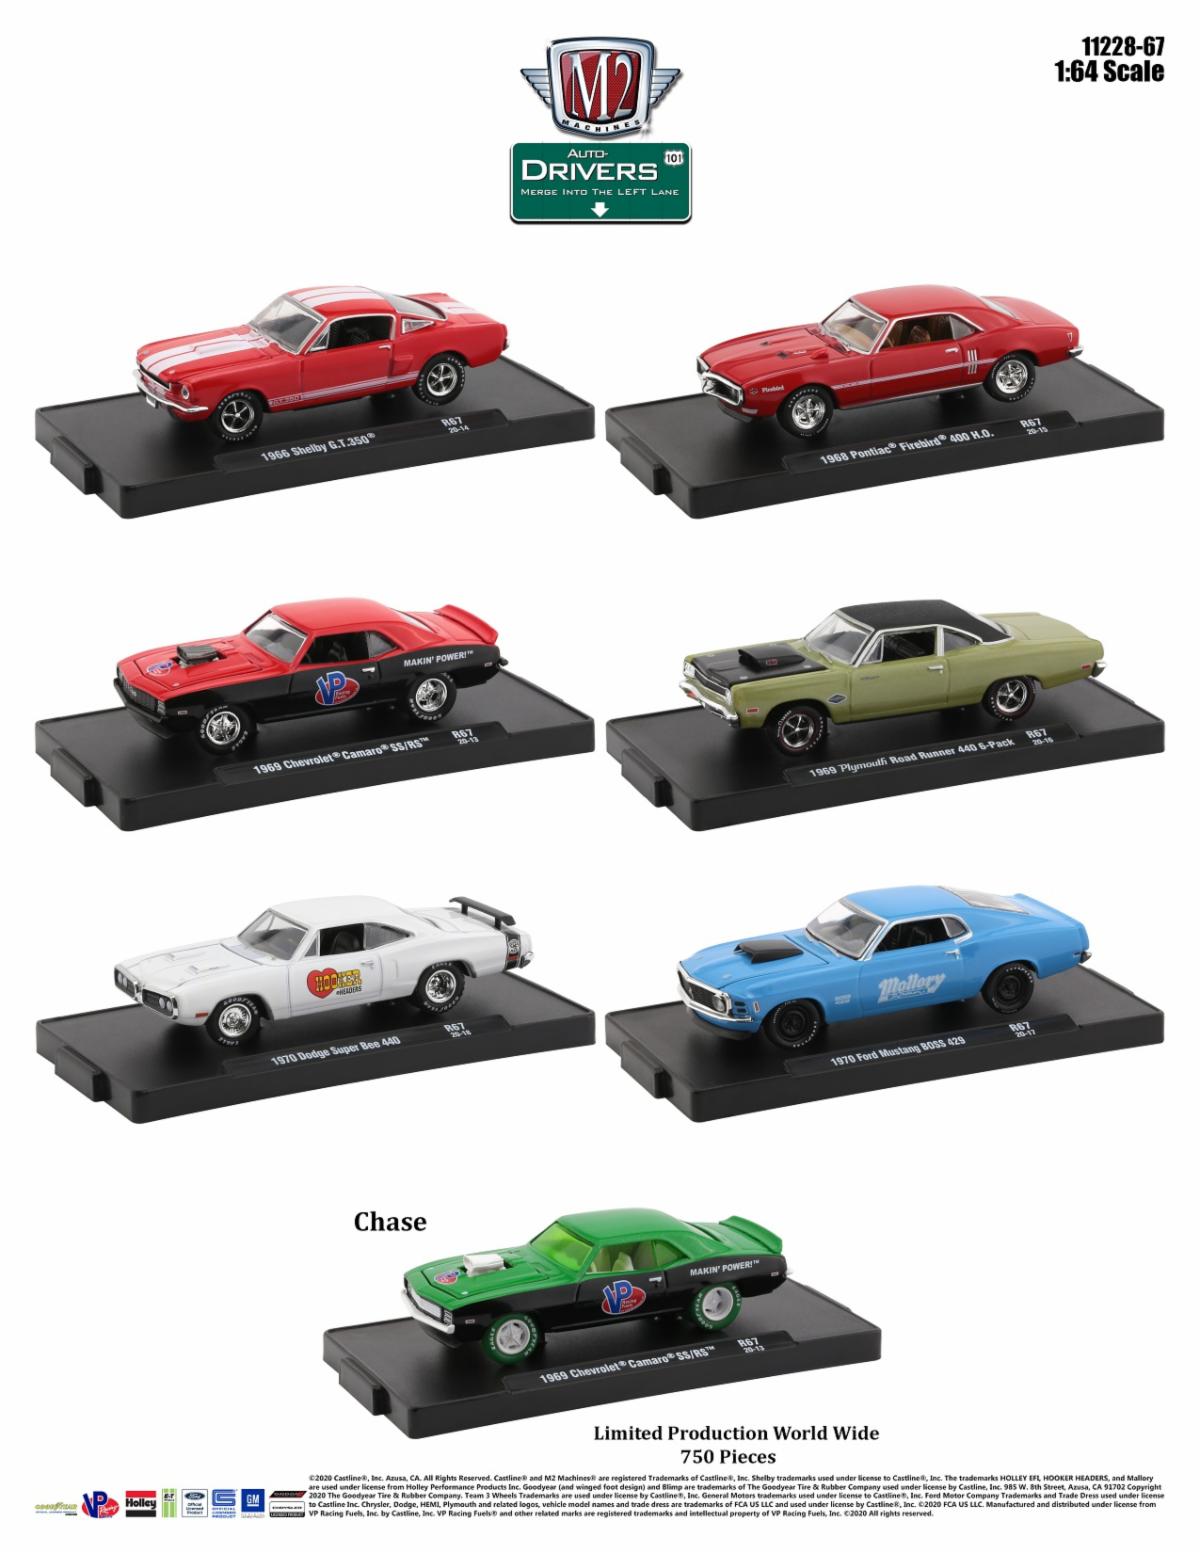 M2 Machines 1:64 Auto-Drivers Release 67 - 6 Style Assortment